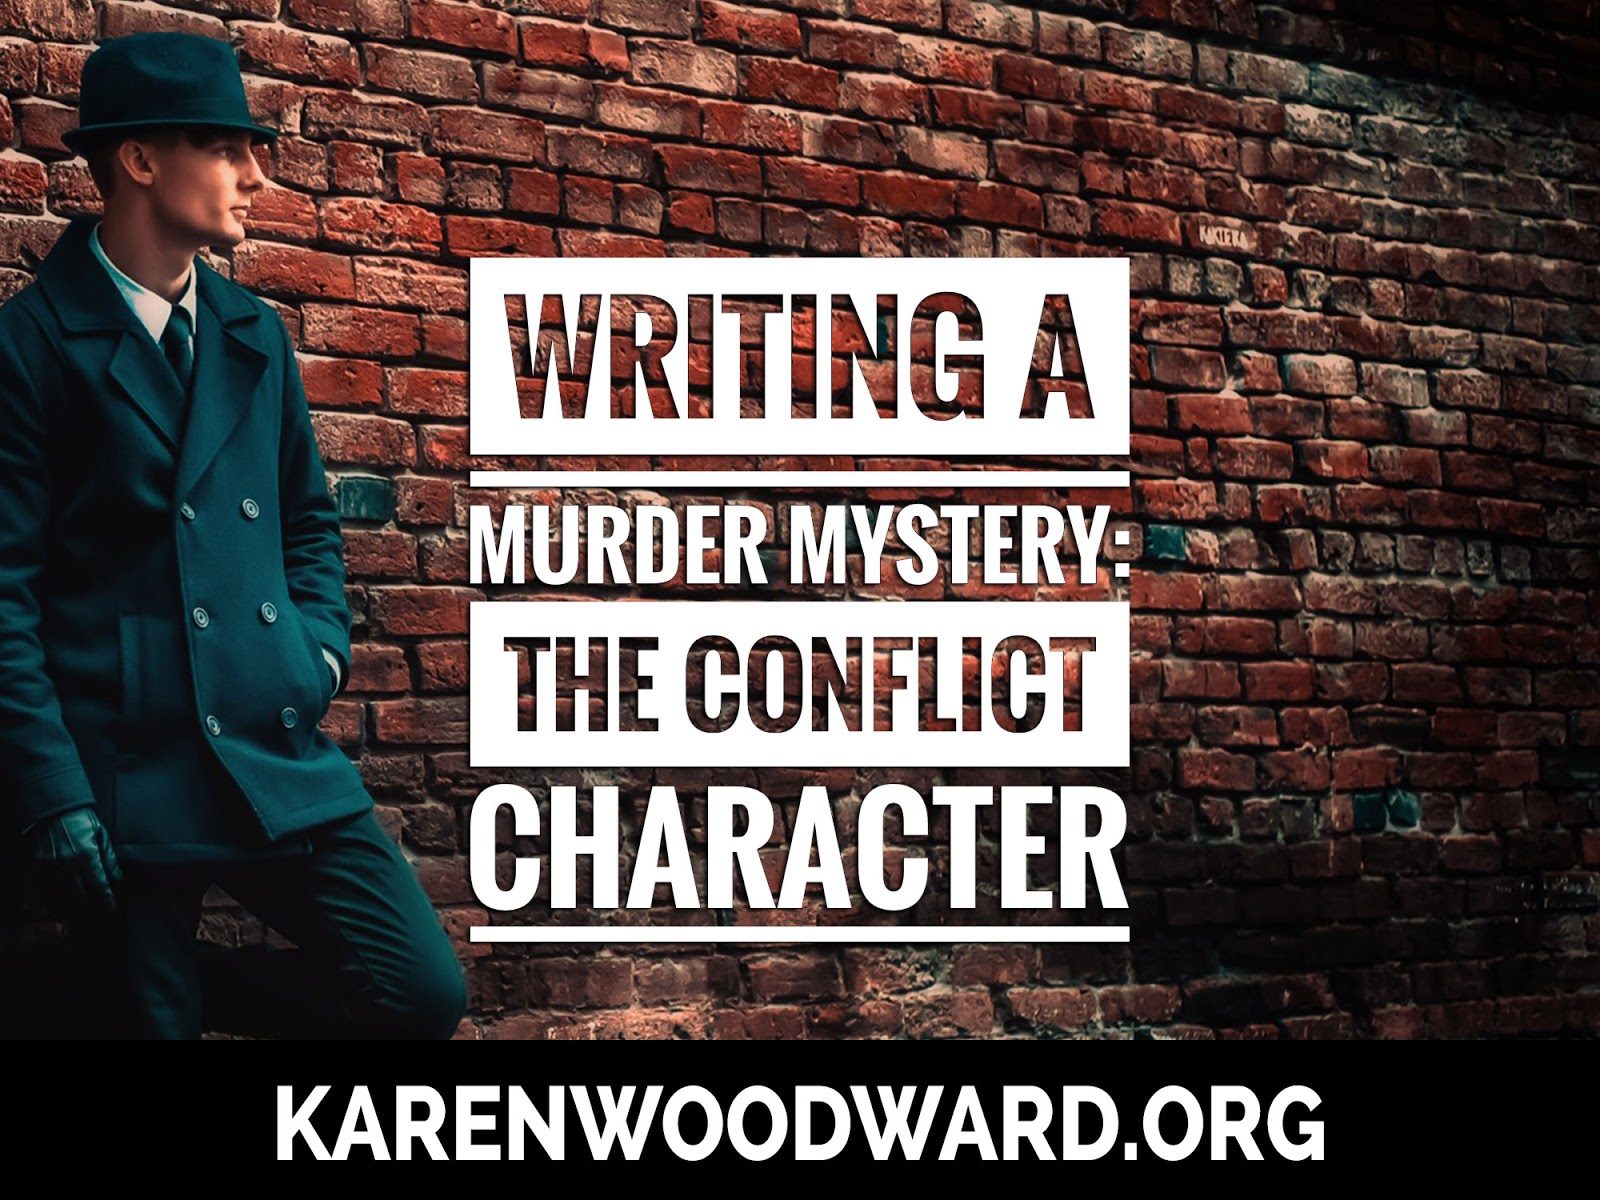 Karen Woodward: Writing a Murder Mystery: The Conflict Character